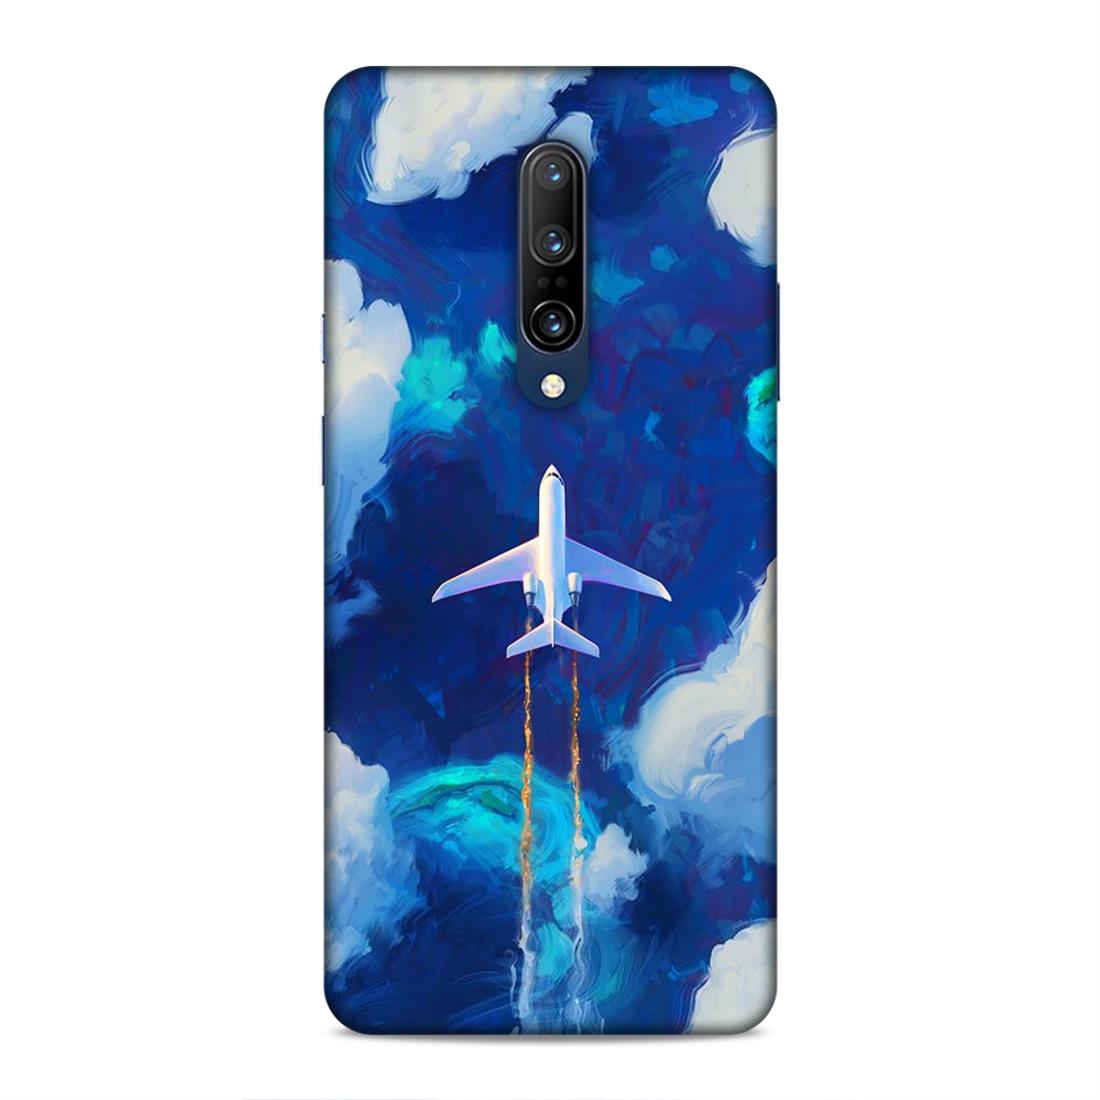 Aeroplane In The Sky Hard Back Case For OnePlus 7 Pro